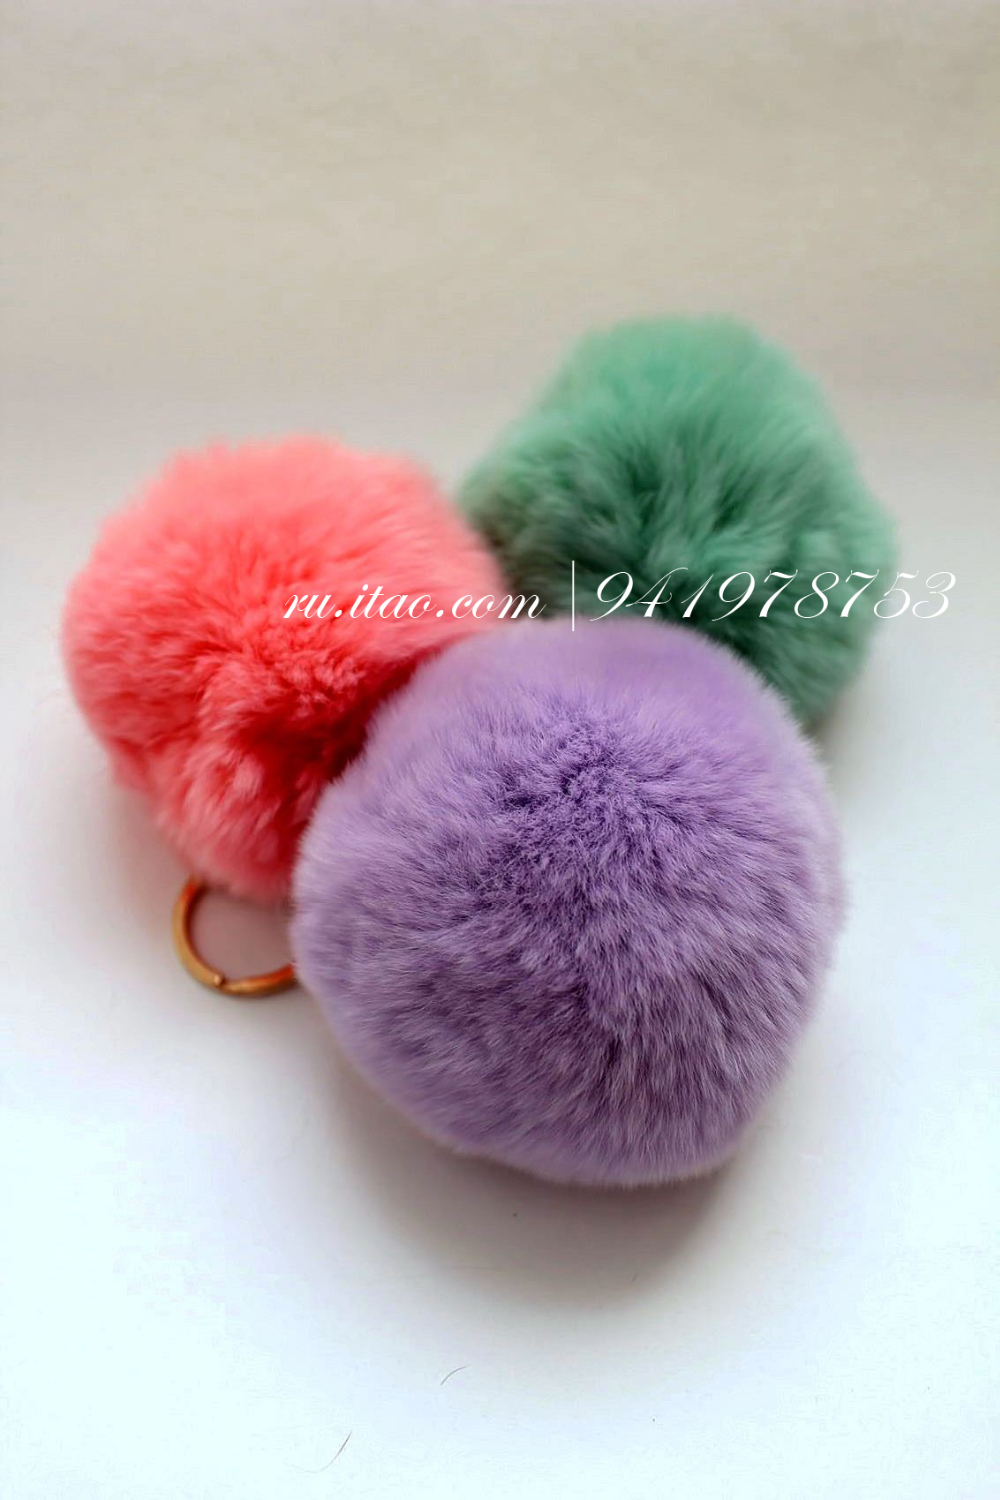 New Arrival Soft 8cm Full Rex Rabbit Fur Ball Gold Keyring KeryChain 8 colors Bag Tag fashion Accessories